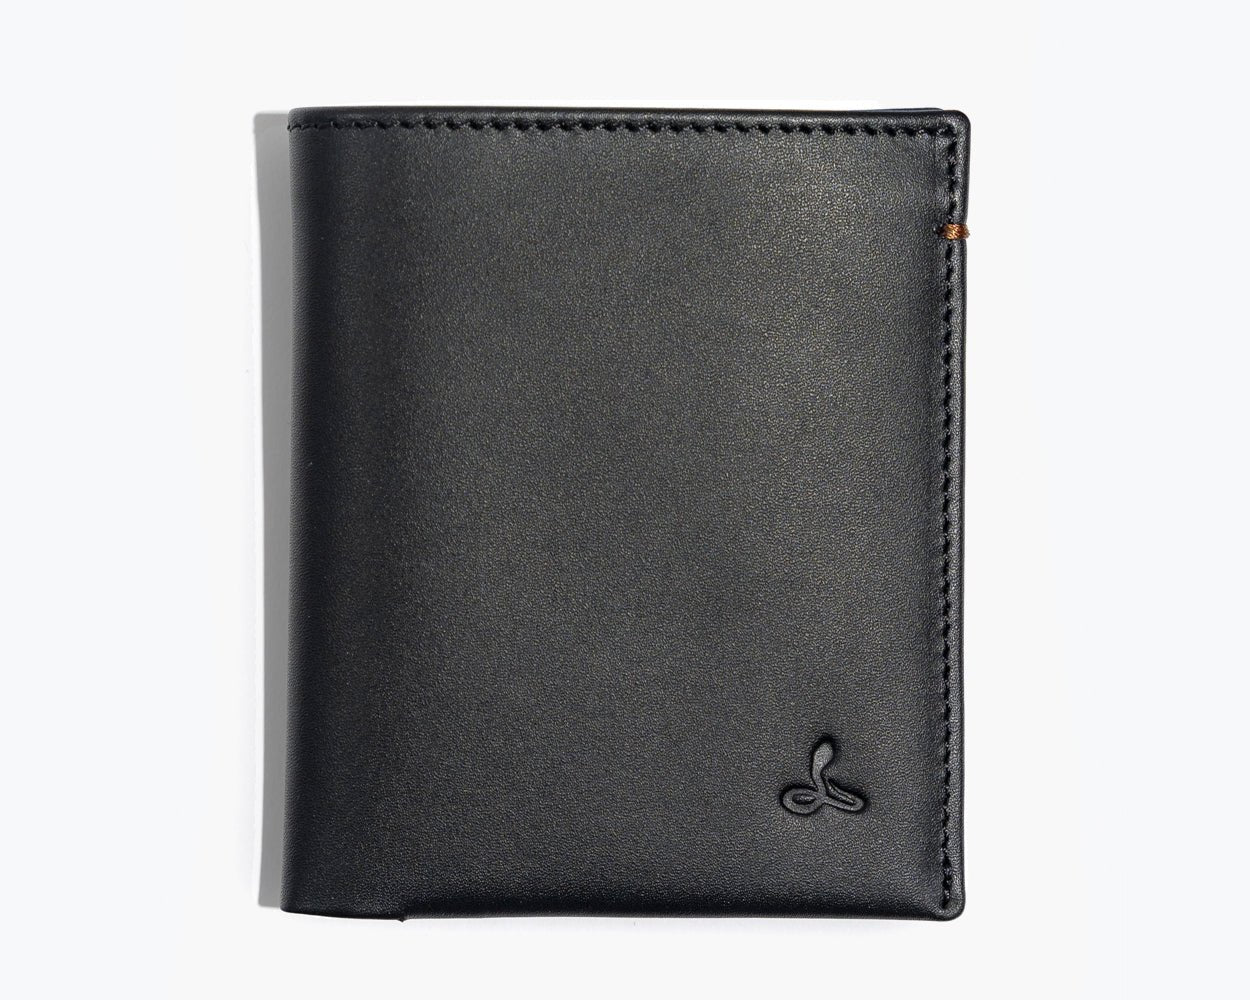 LEATHER BIFOLD WALLET - THE ESSENTIAL COLLECTION Black/Cognac - Snakehive UK